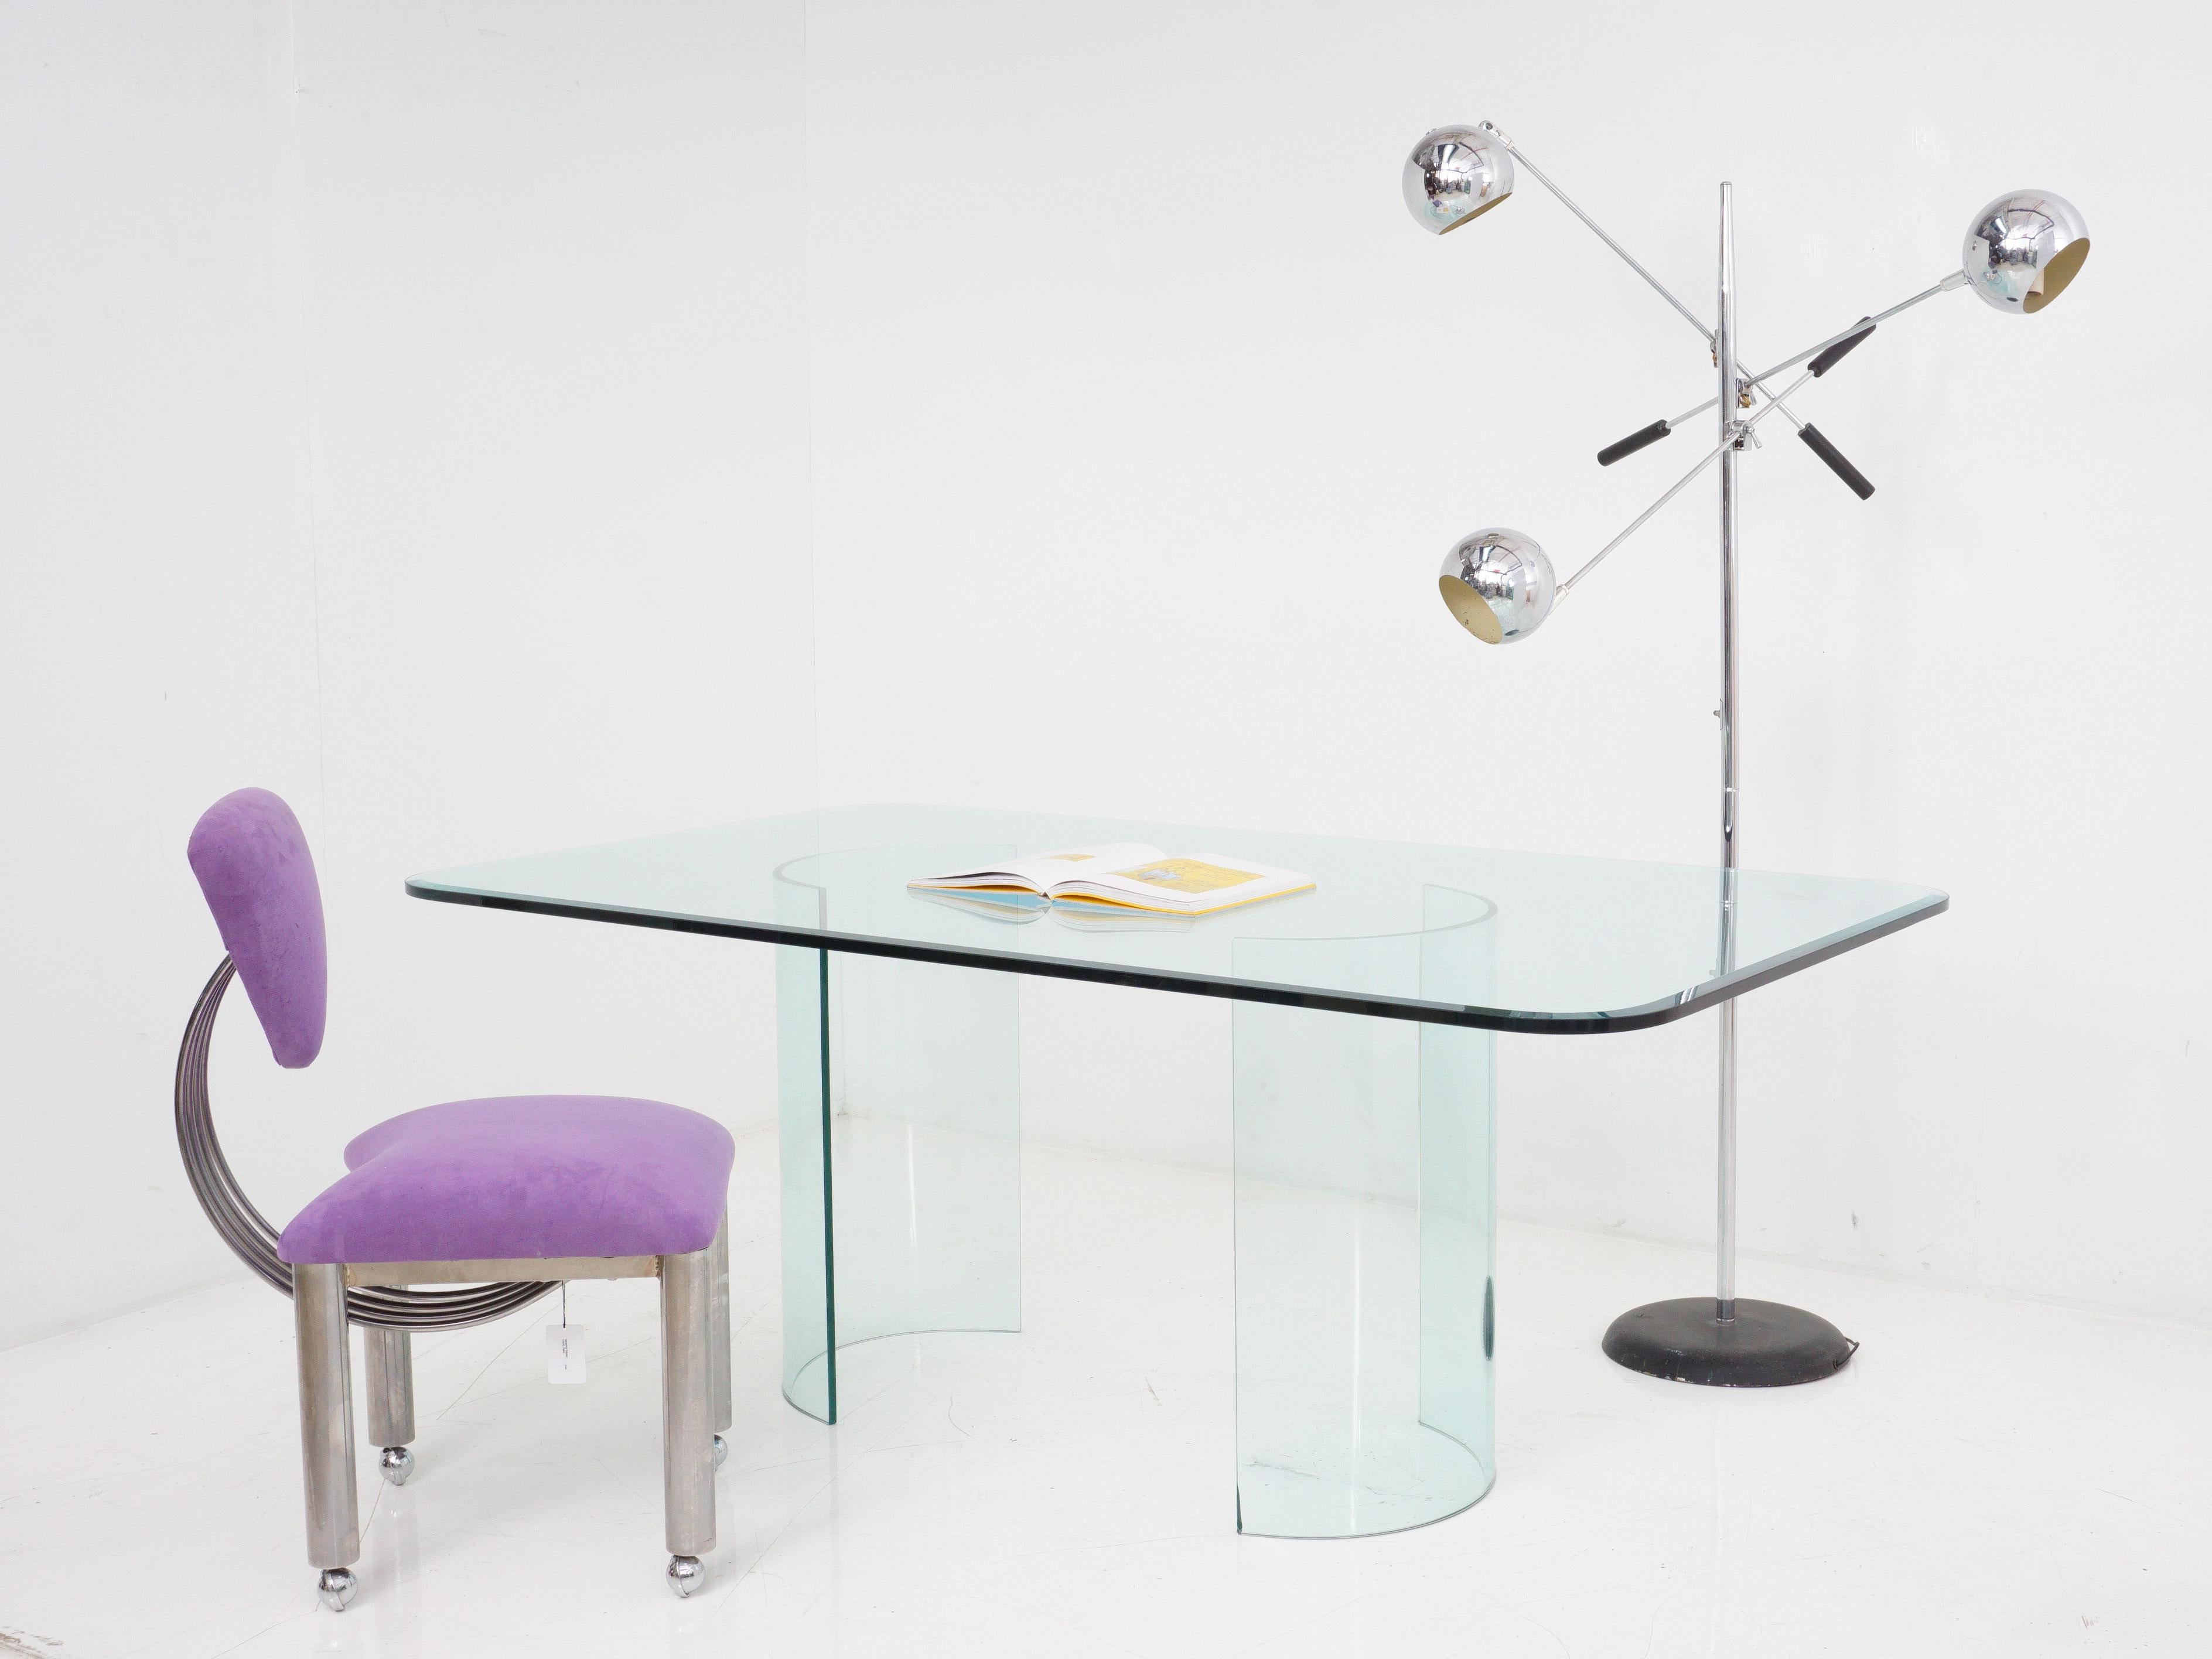 With its bent glass legs defying gravity, the postmodern glass dining table is the ultimate conversation starter for dinner parties - it's like dining on a work of art that just happens to hold your food.

- 72